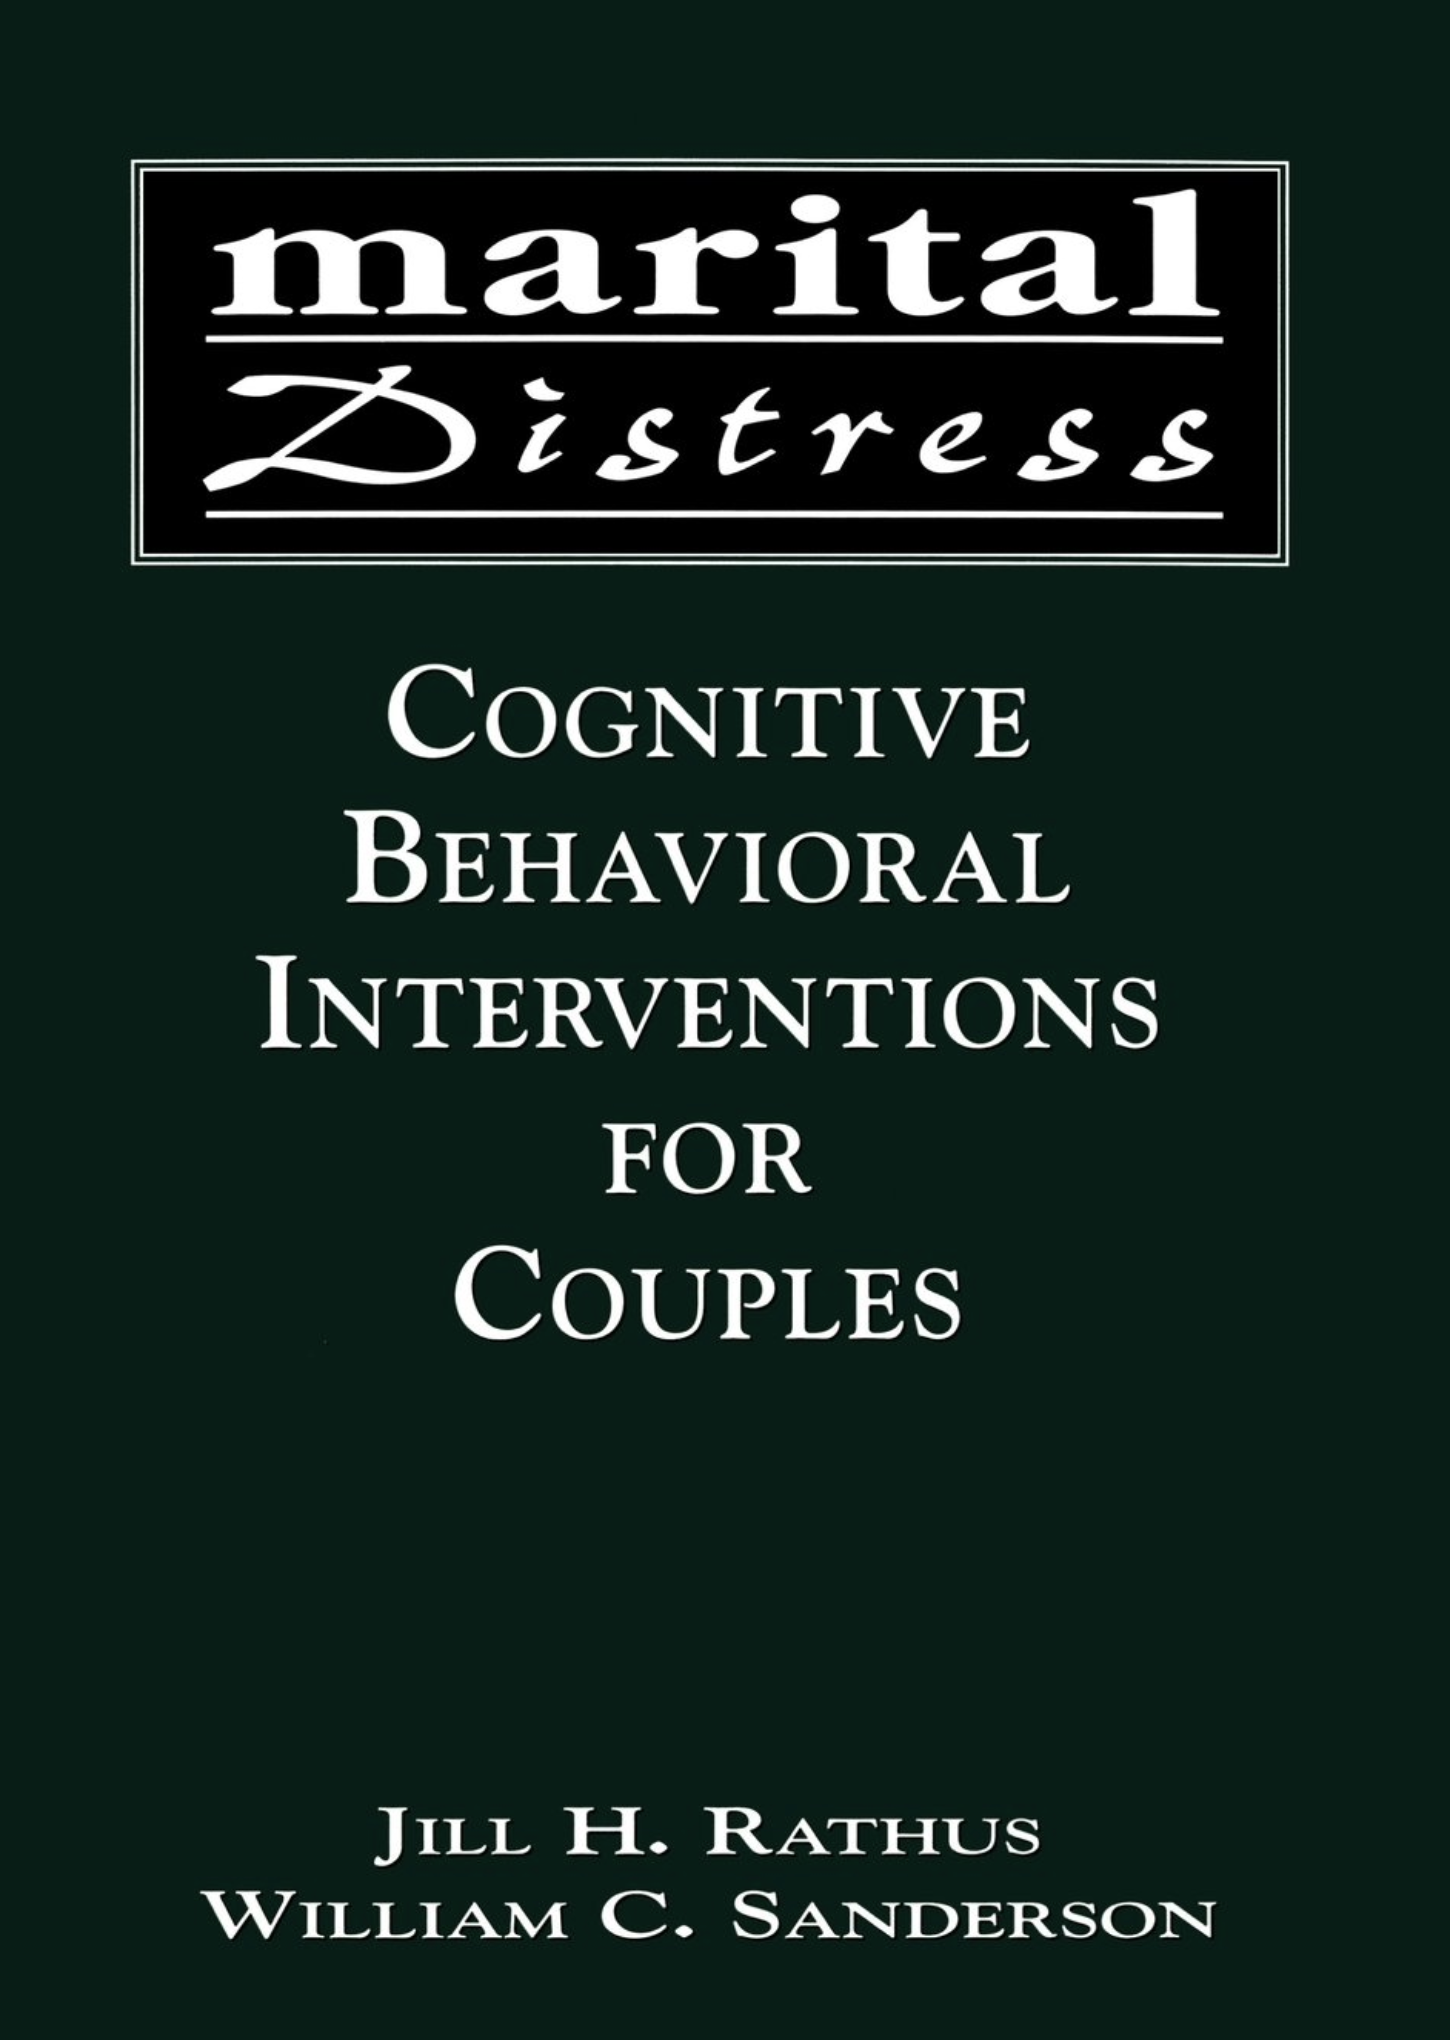 Book cover of "Marital Distress: Cognitive Behavioral Interventions for Couples"